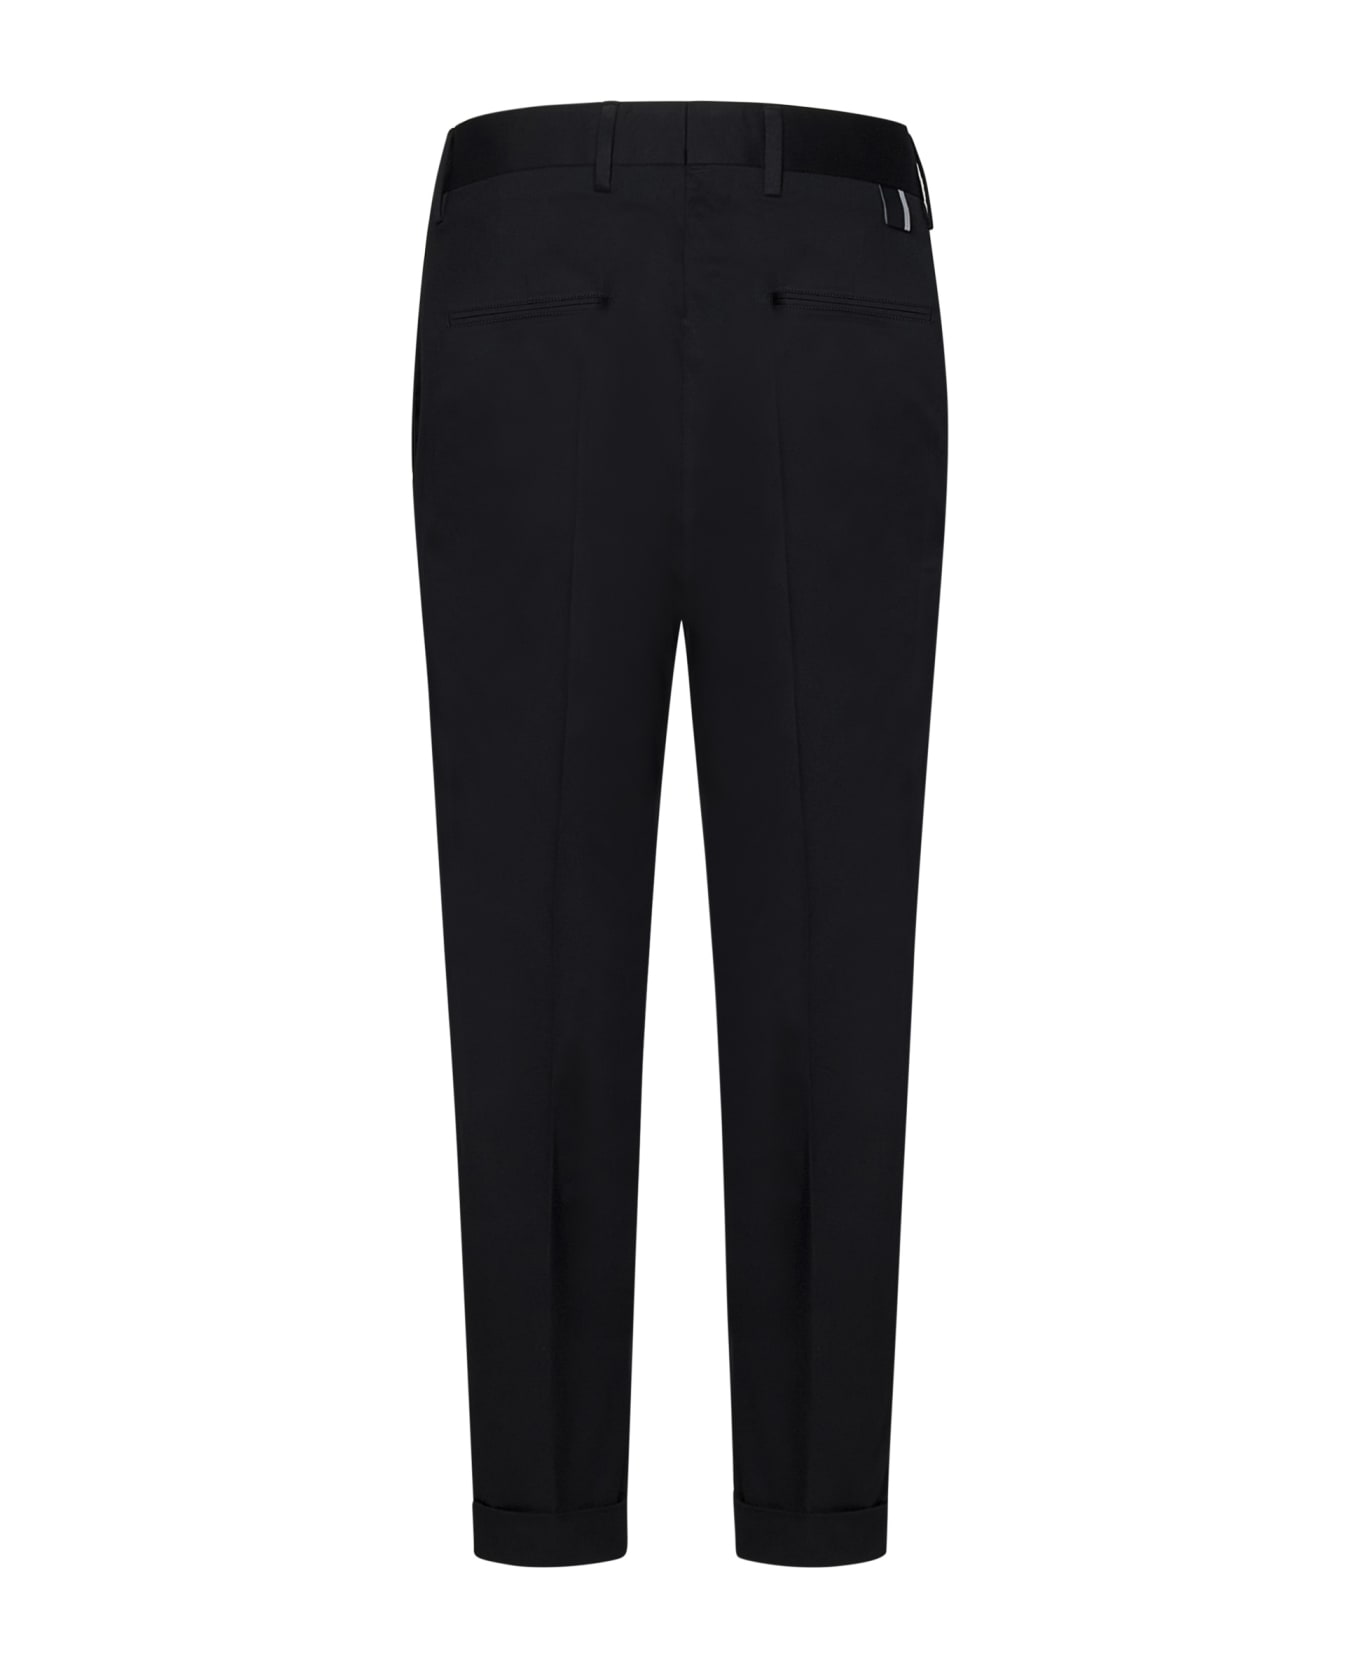 Low Brand Cooper T1.7 Trousers Arrives - Black